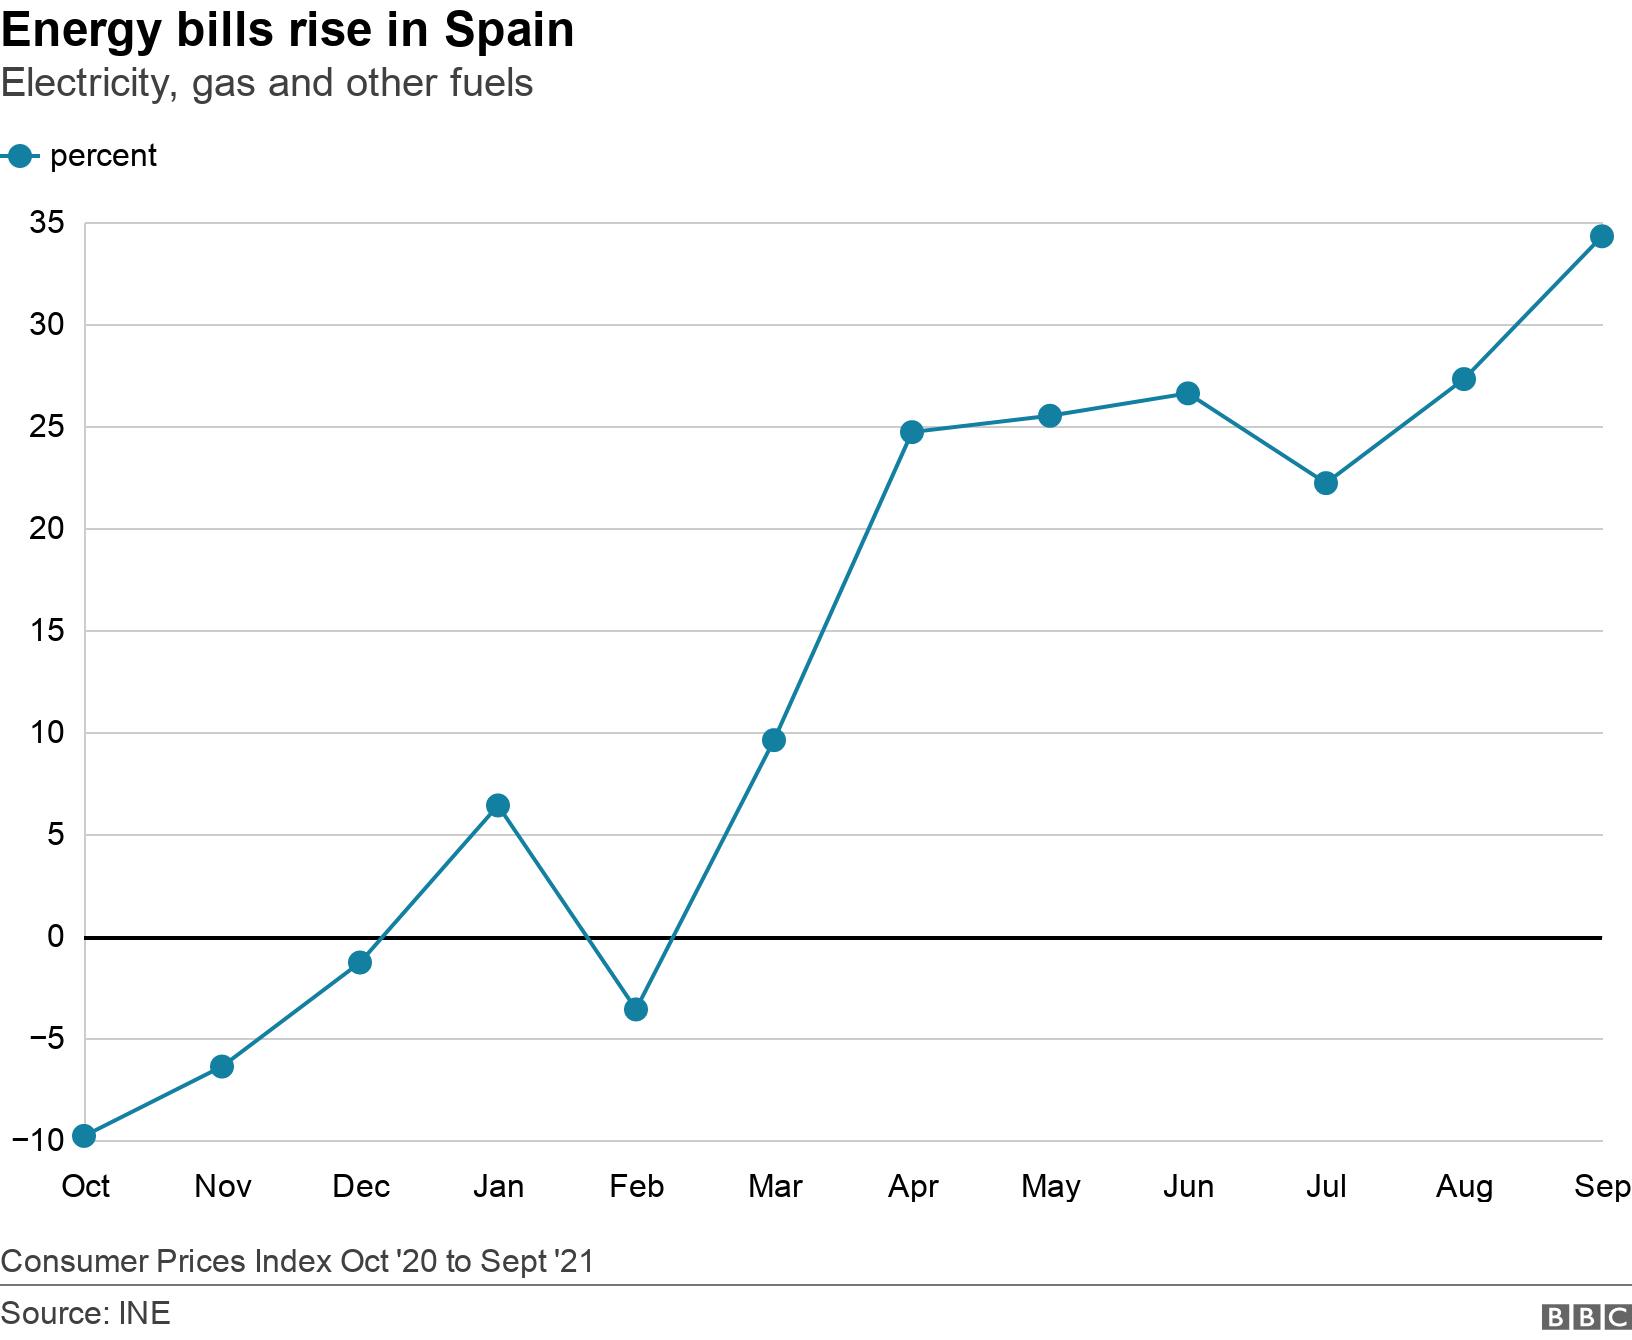 Energy bills rise in Spain. Electricity, gas and other fuels. Domestic bills rise in Spain Consumer Prices Index Oct '20 to Sept '21.